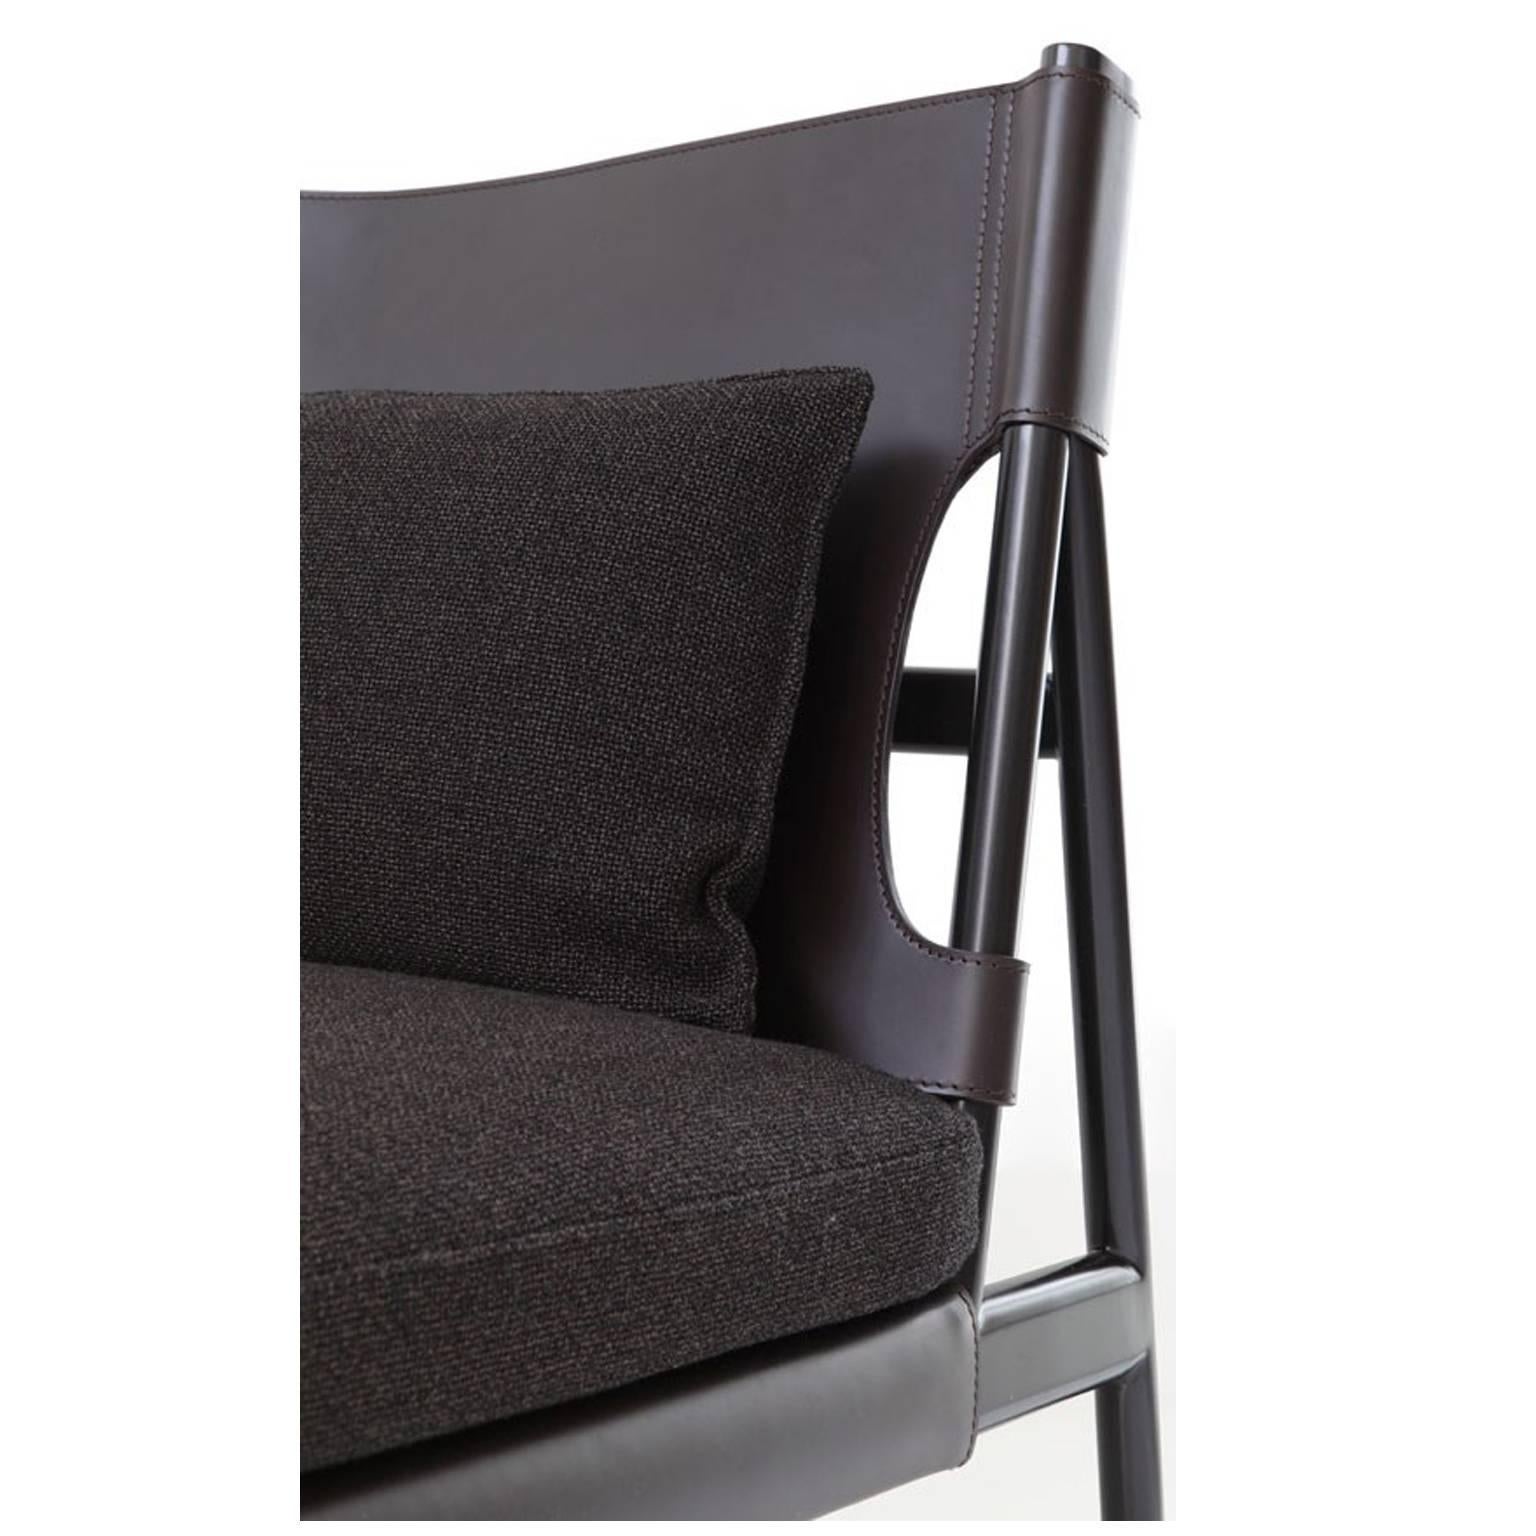 Black varnished metal structure covered in black saddled leather with seat and toss pillows in fully removable fabric covers, available from showroom display. 
Dimensions: 75